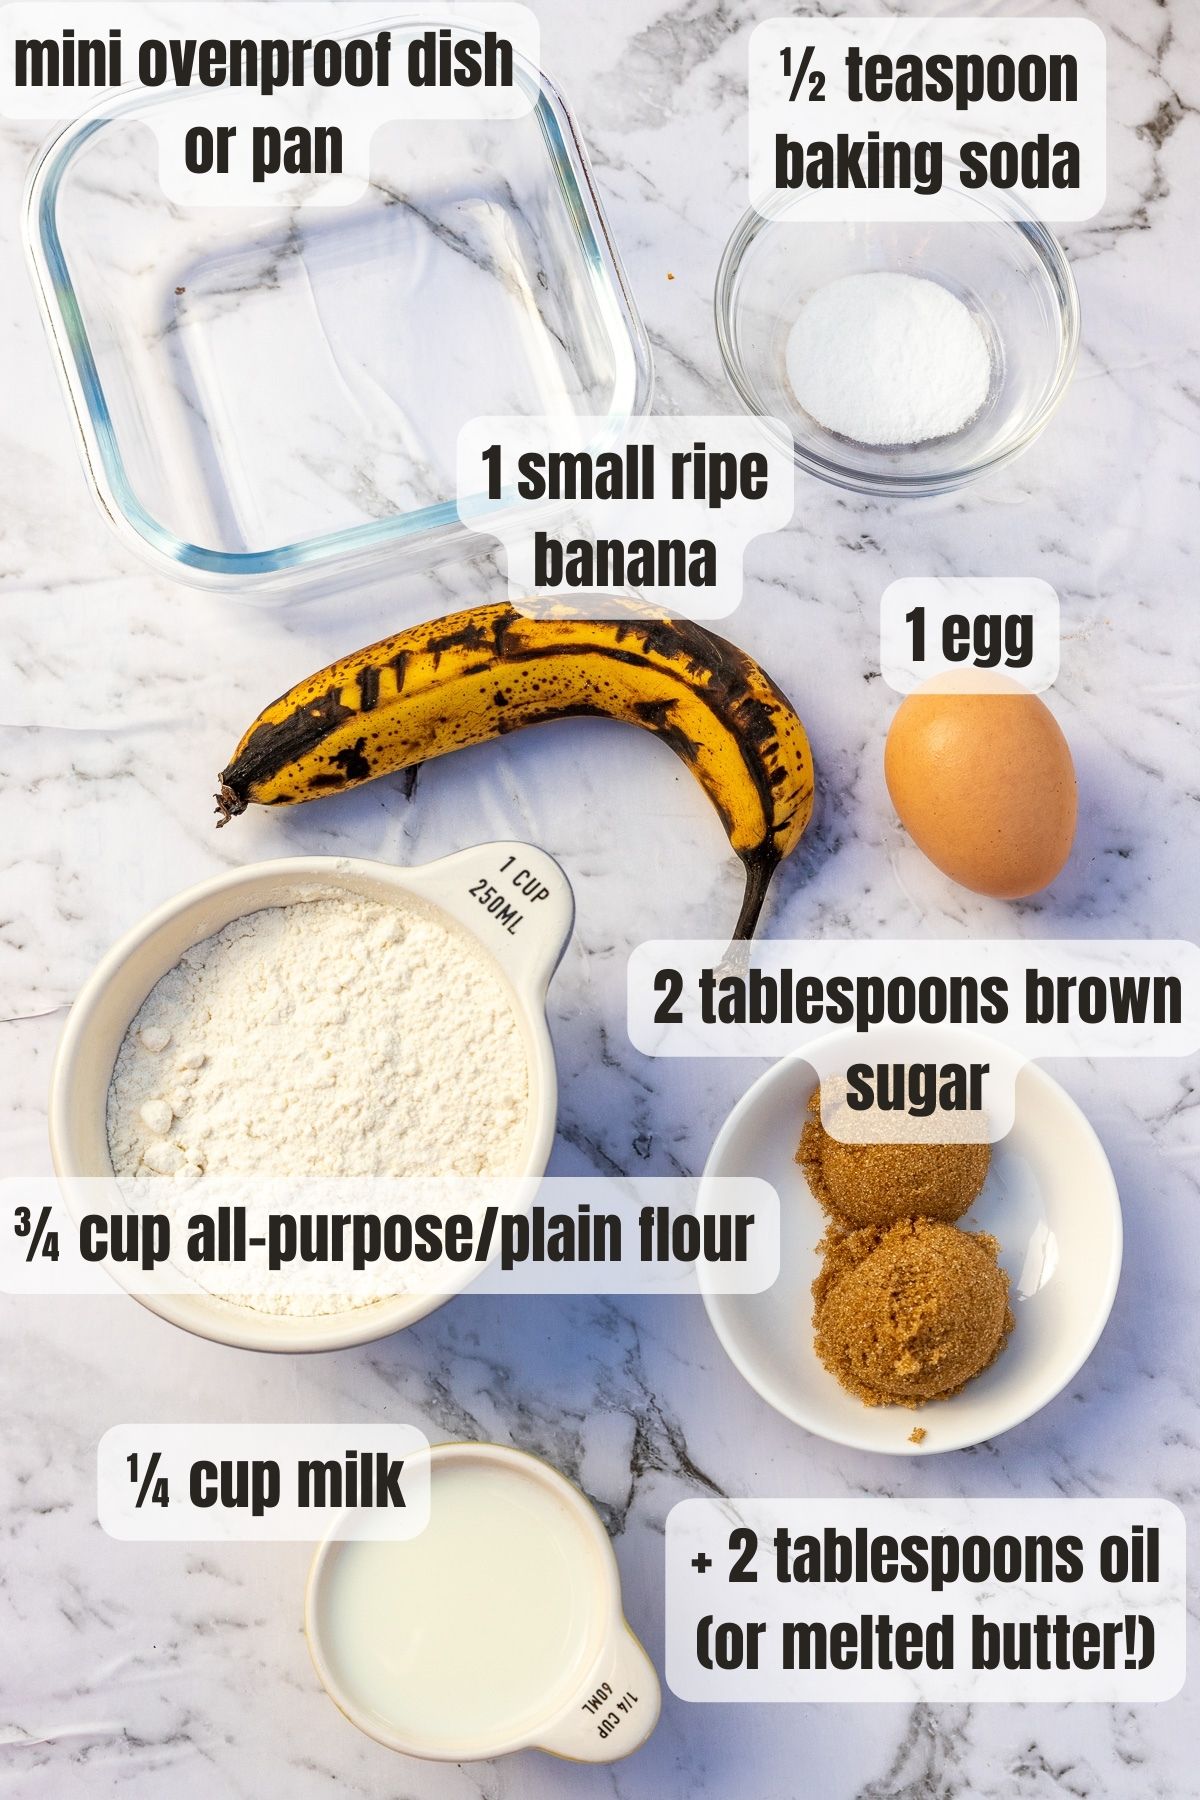 All the ingredients needed to make mini air fryer banana bread including flour, an egg, milk, a ripe banana and oil, on a marble background.